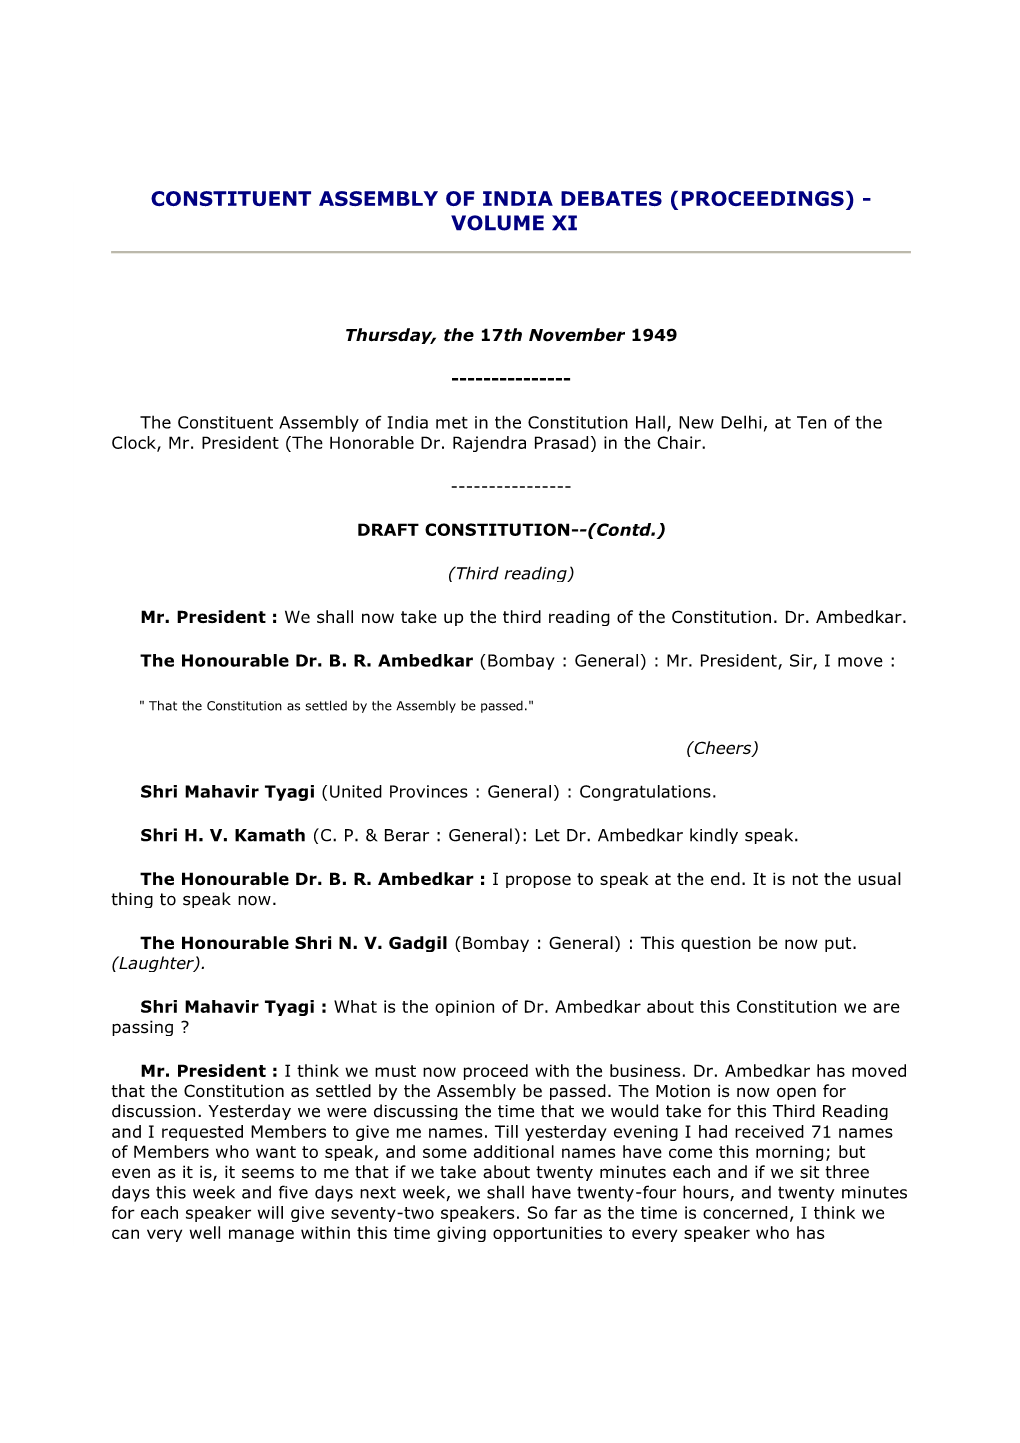 Constituent Assembly of India Debates (Proceedings) - Volume Xi